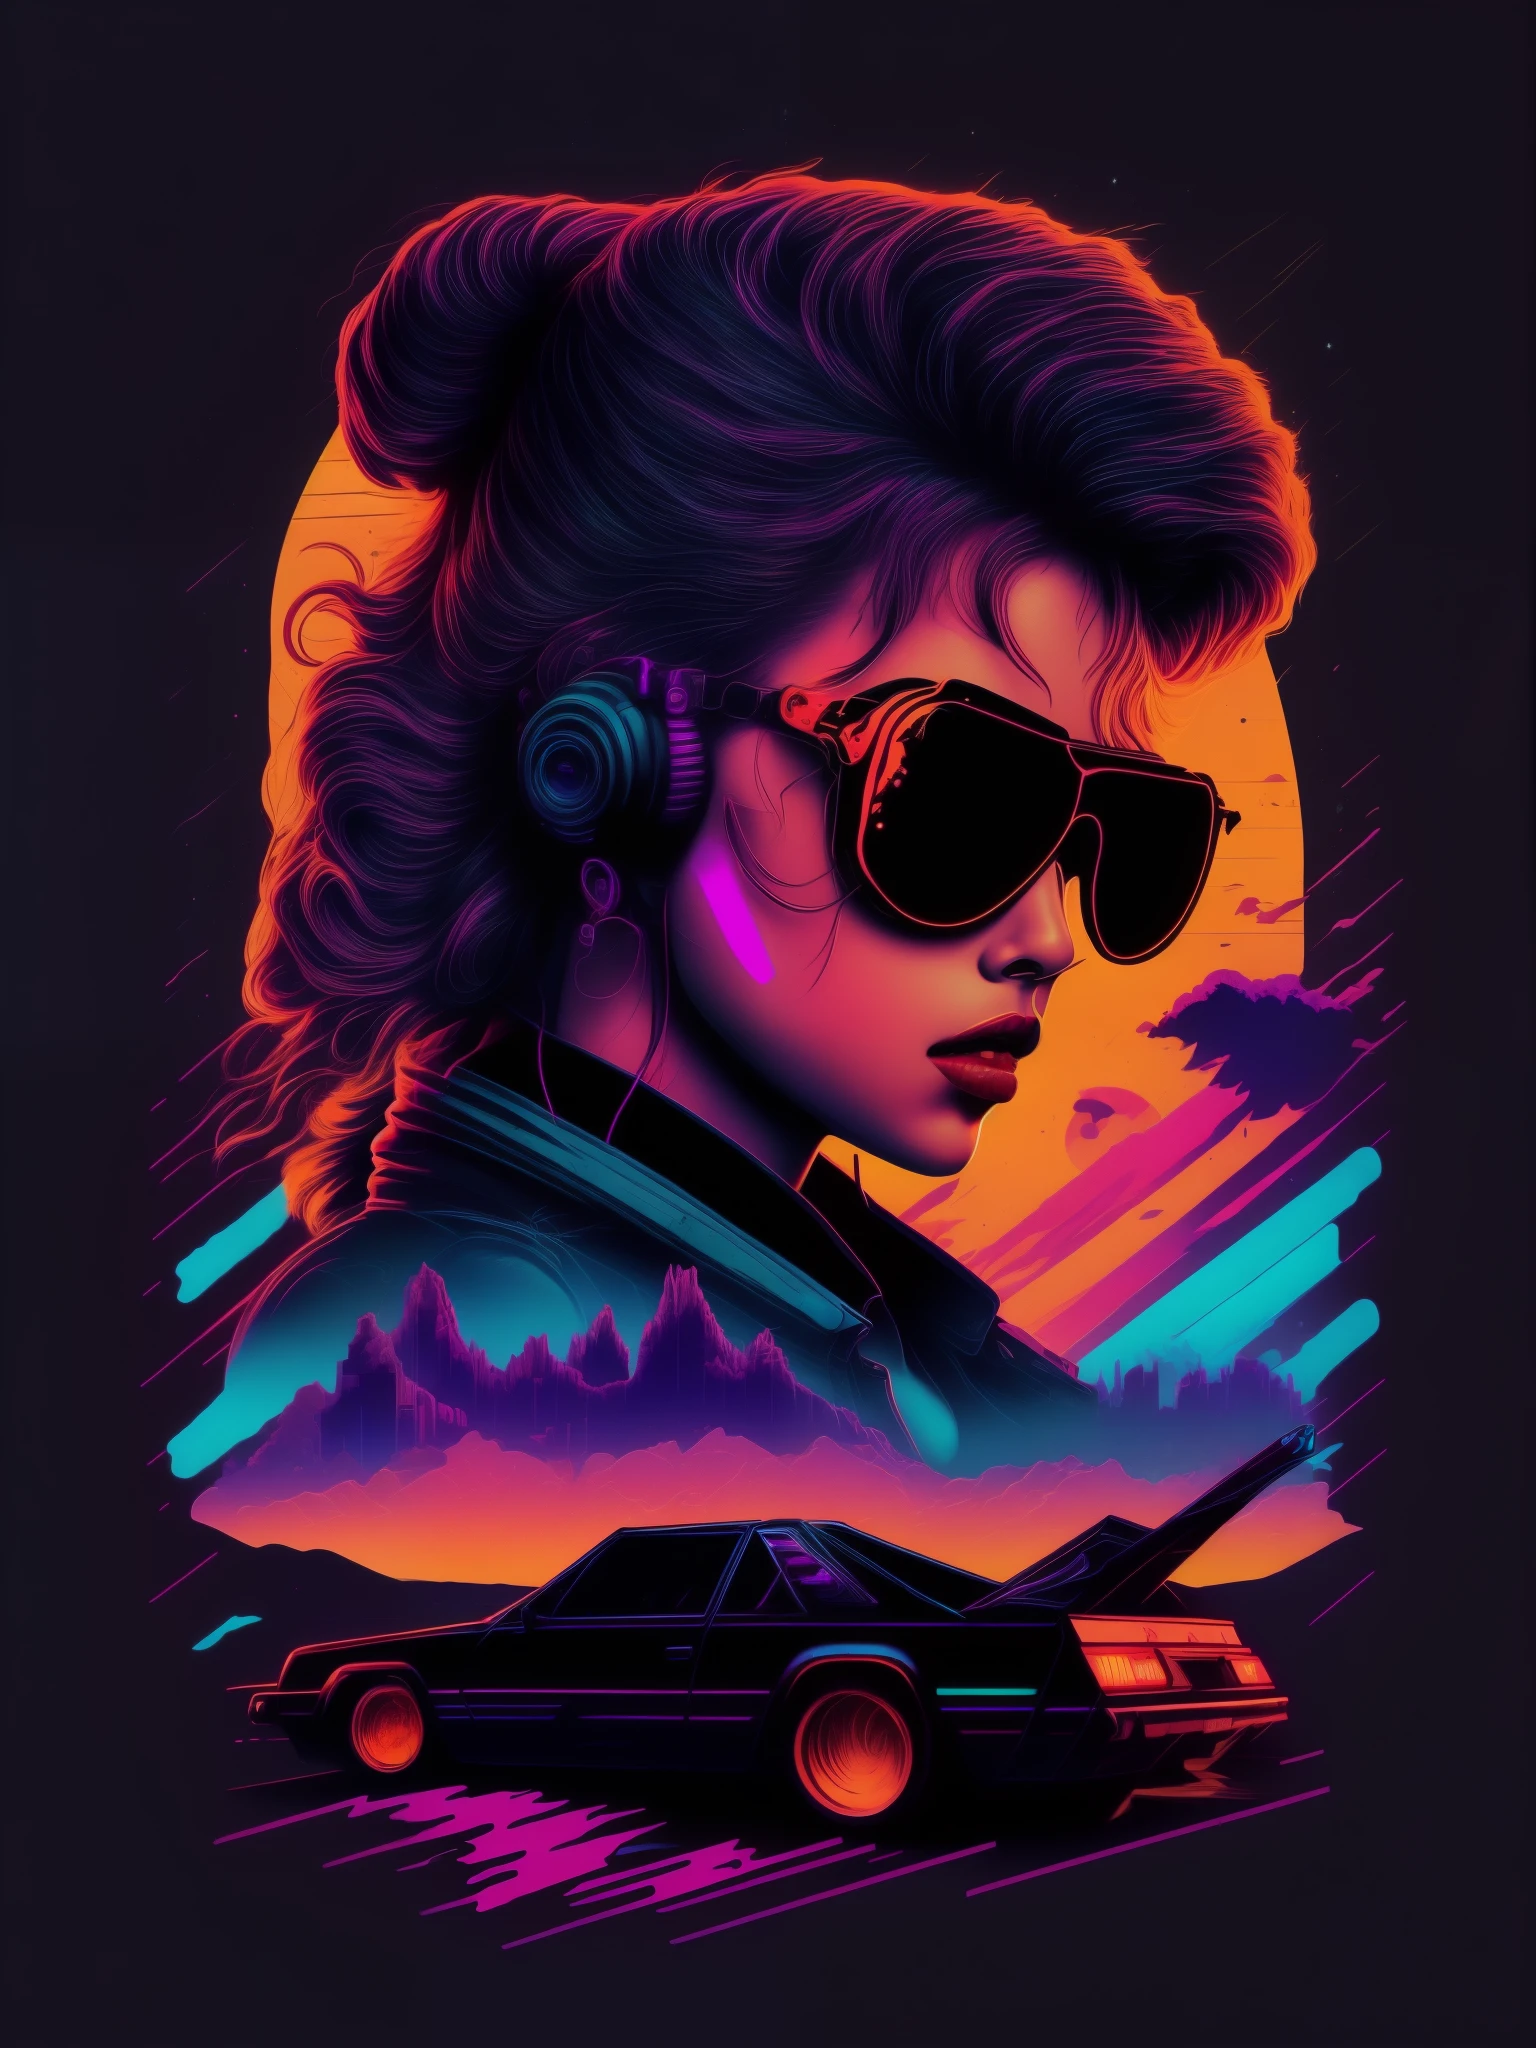 Hot Girl, car, vectorized, synthwave, purple blue red orange, bright neon colors on a dark background,